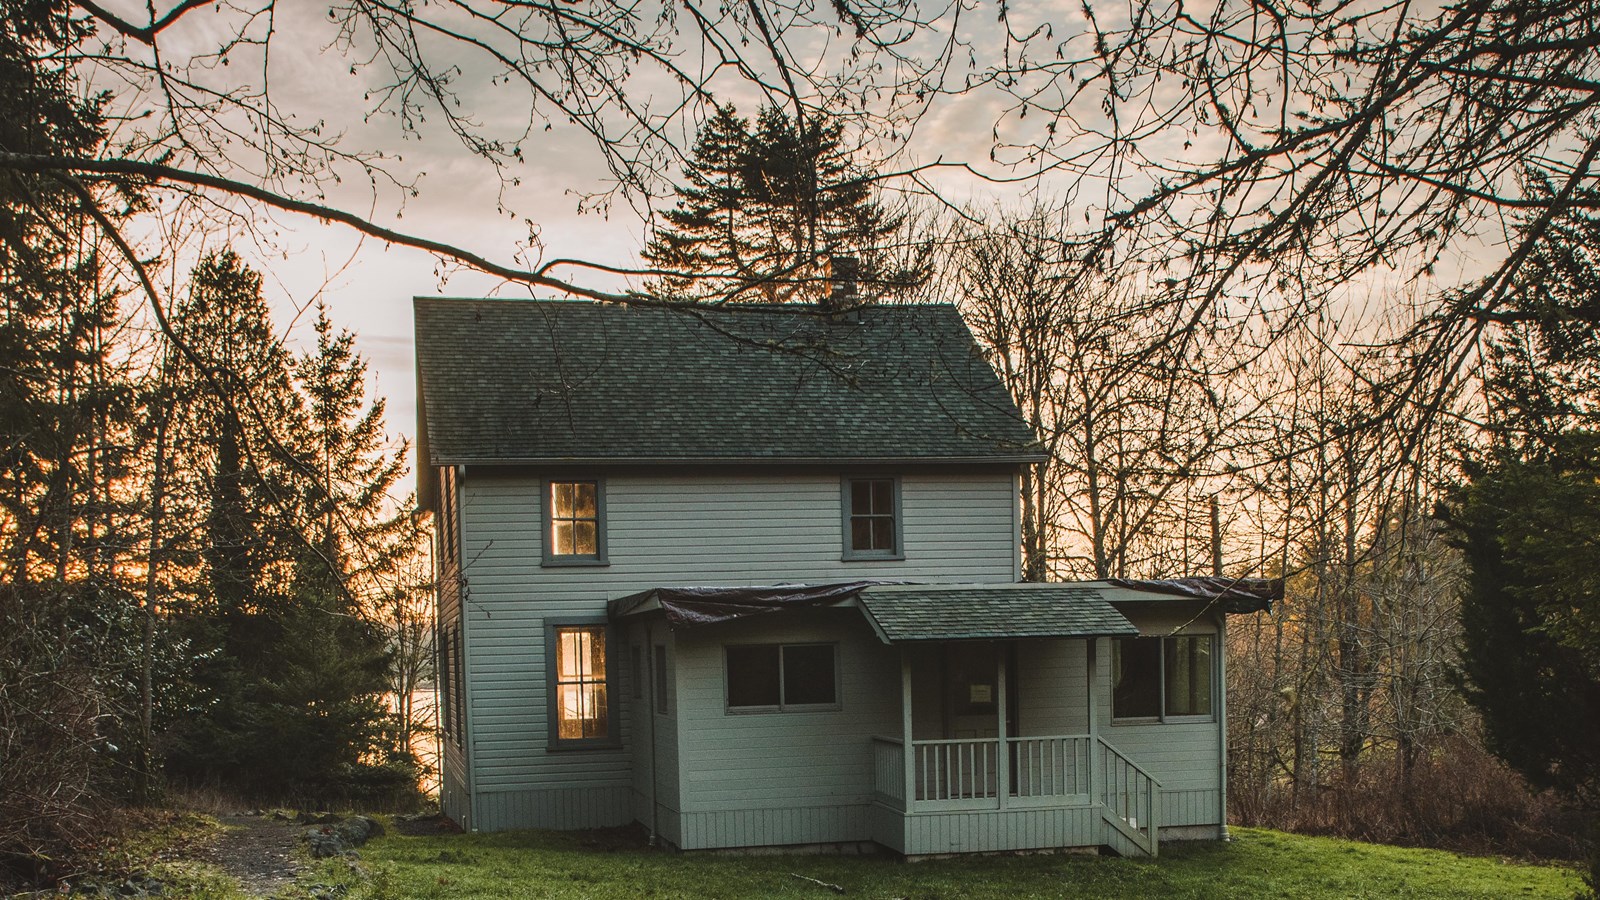 Color photograph of a frame house with porches in a green field at sunset